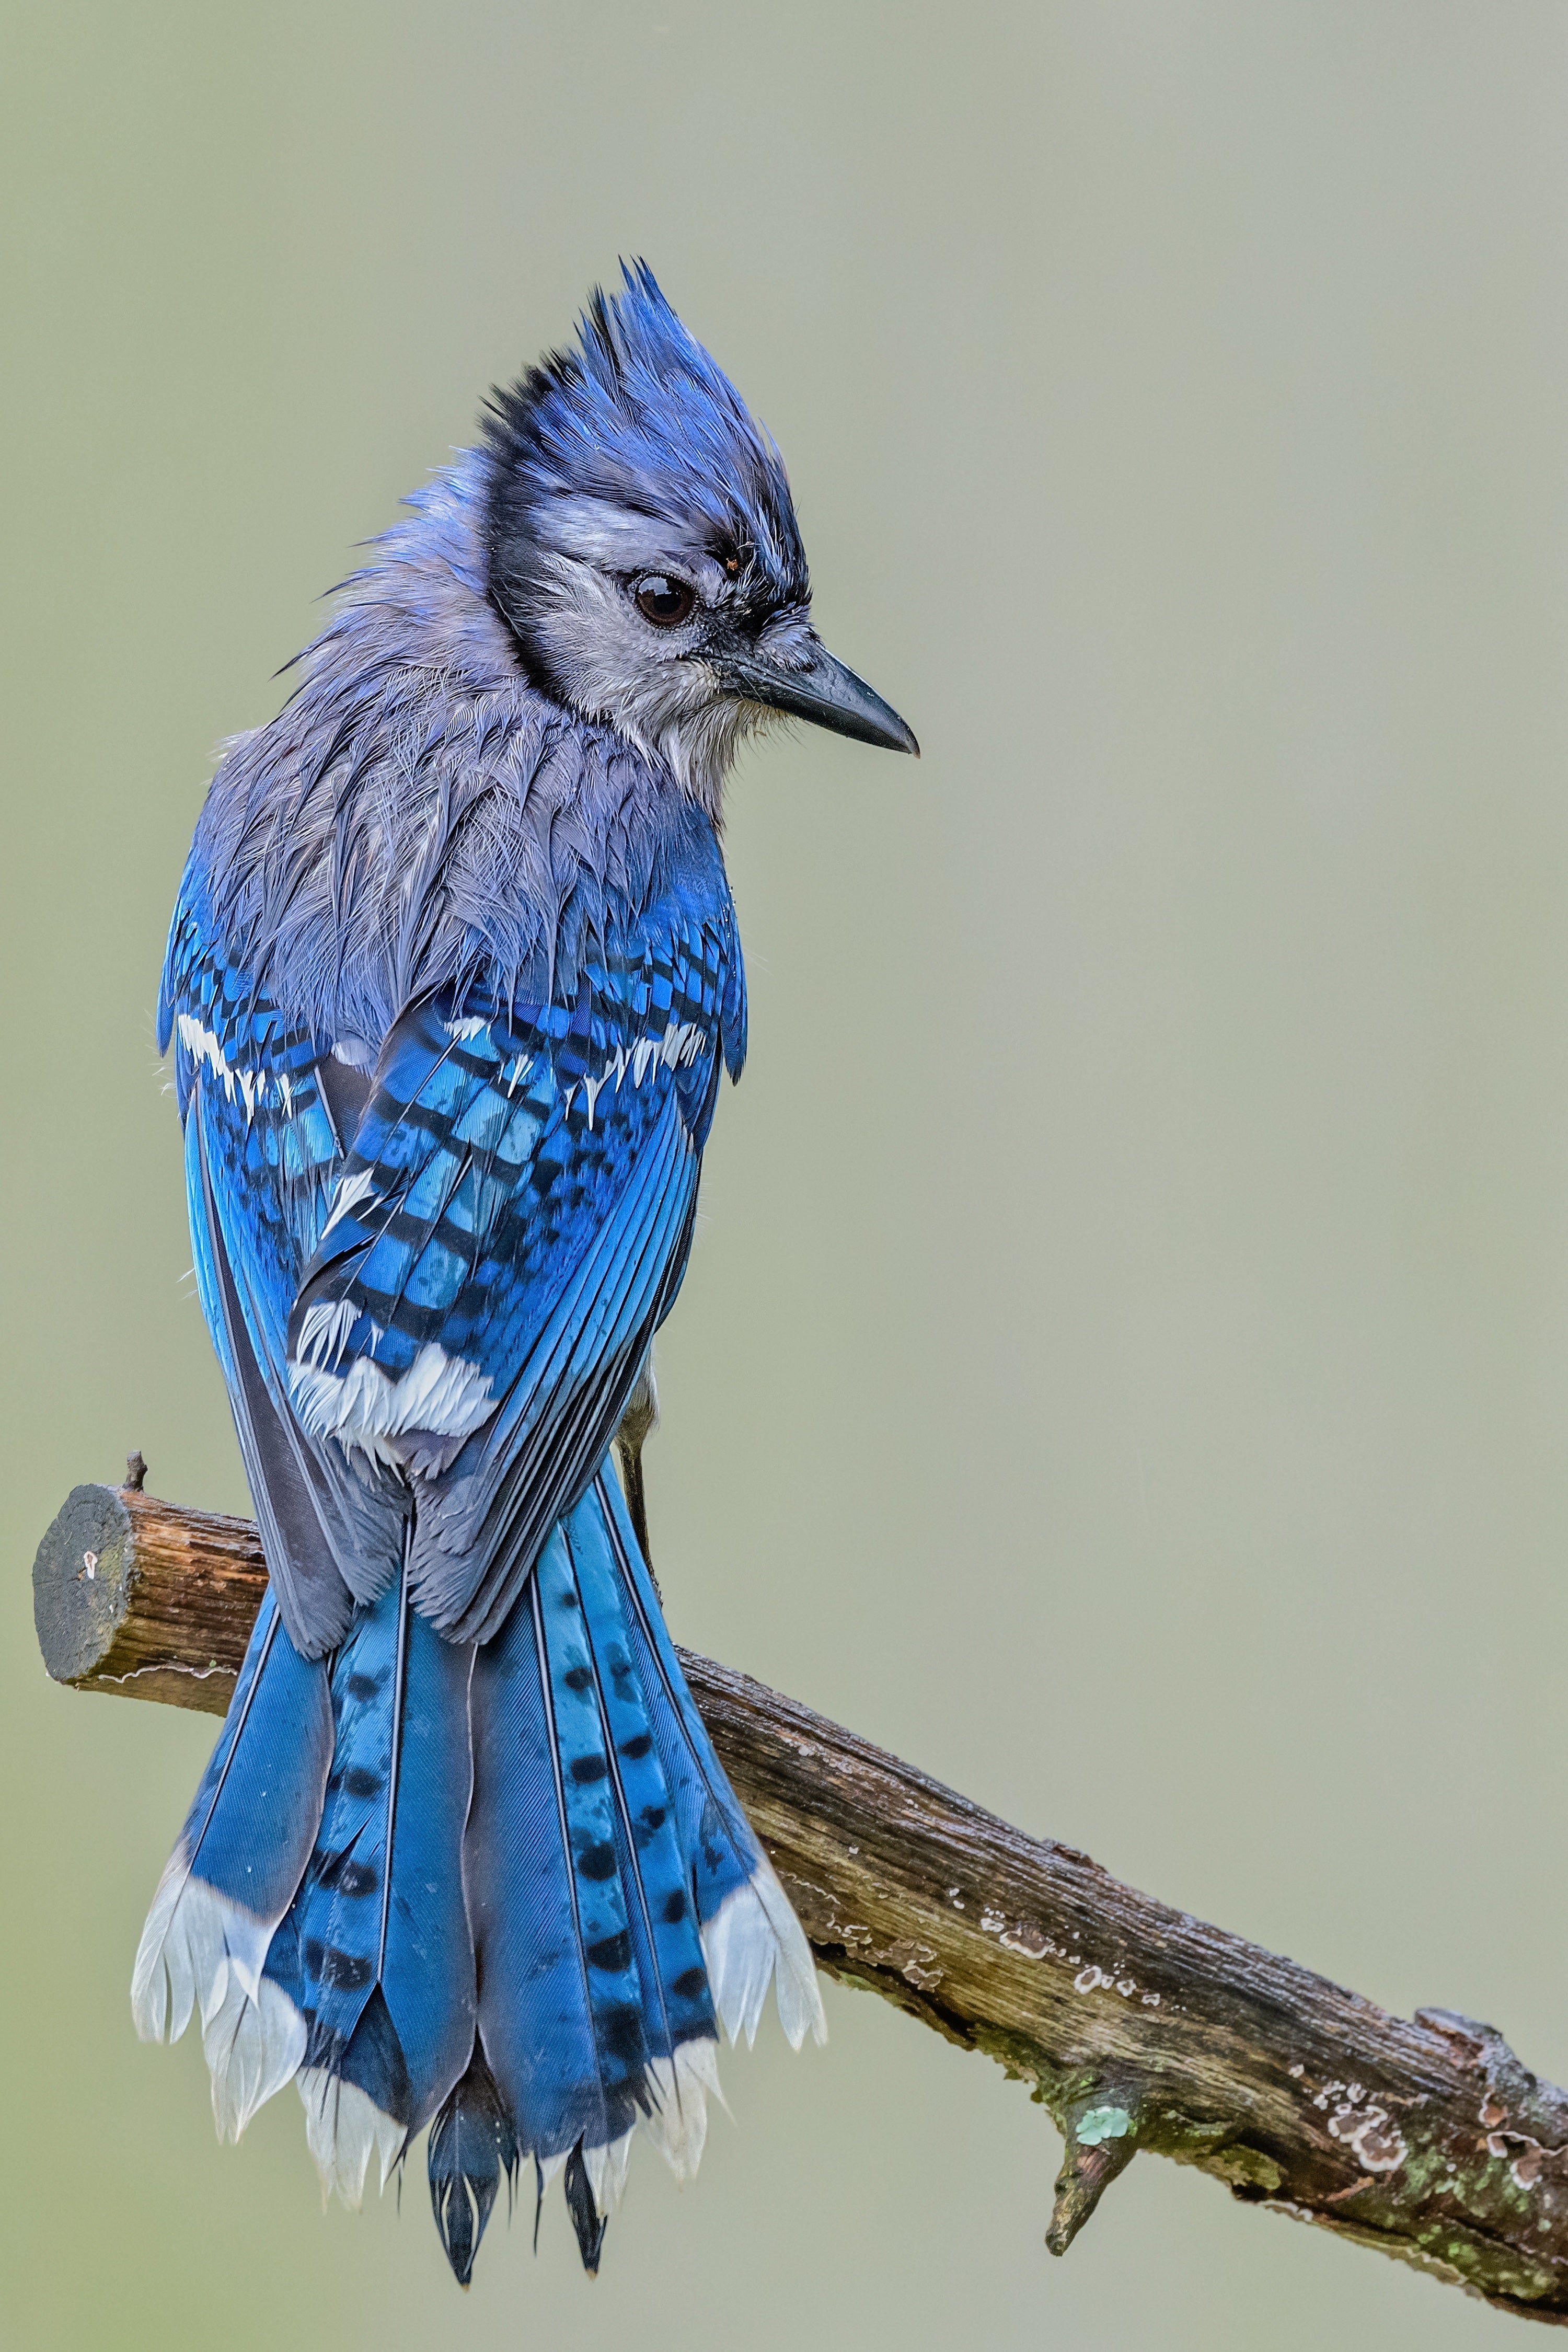 Jim Flynn took Second Place in the Birds Category of the 2023 Outdoor Alabama Photo Contest with this image of a blue jay in Albertville. 